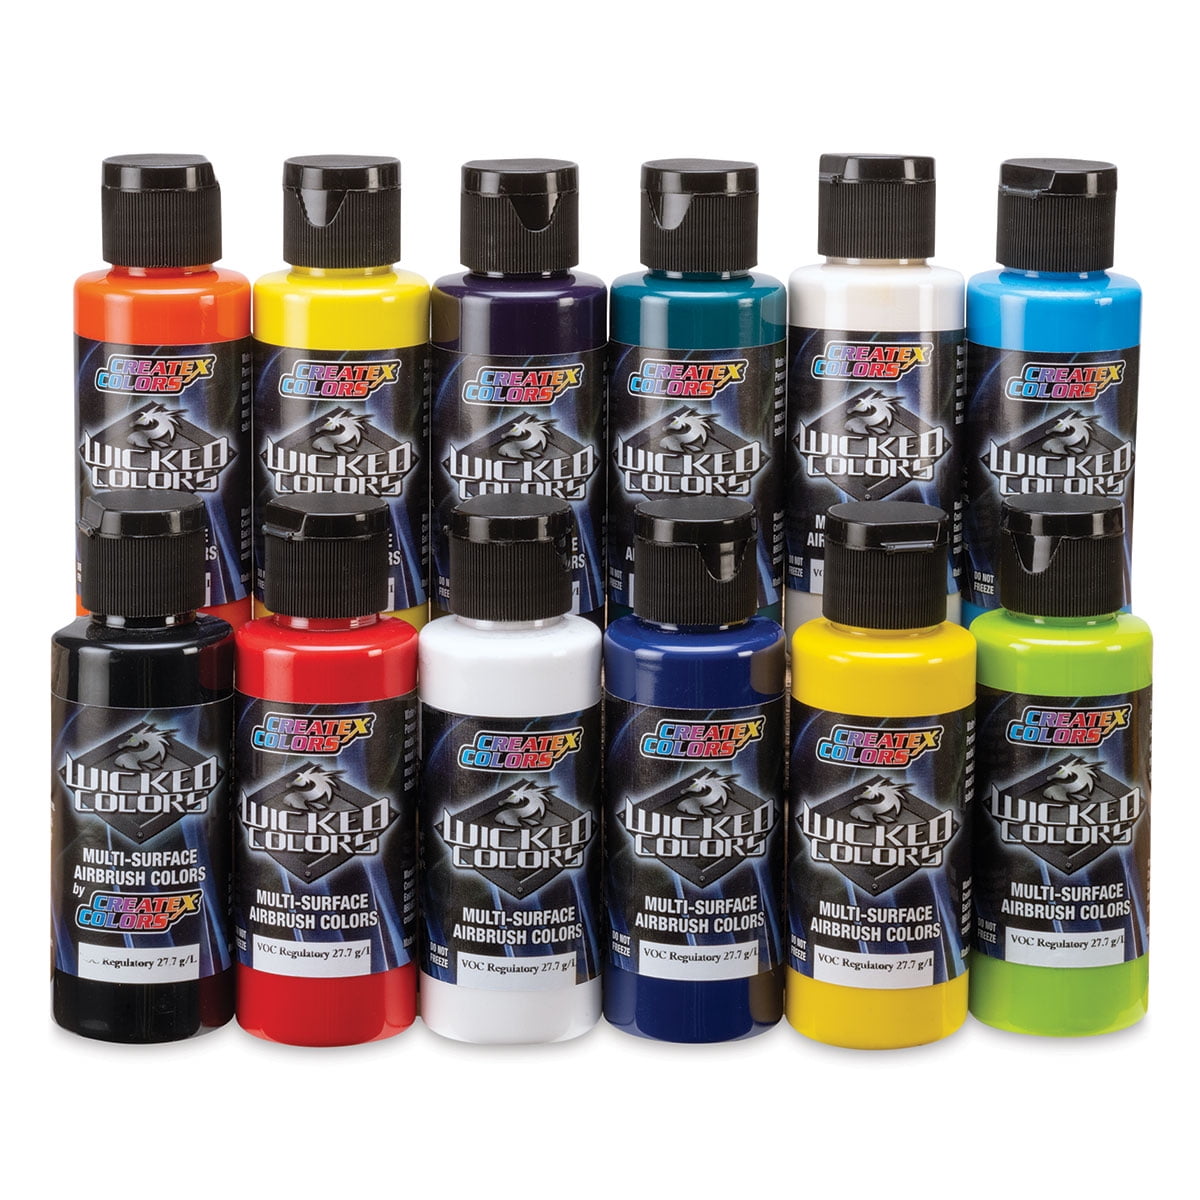 Createx Wicked Colors Airbrush Color - Opaque Colors, Set of 12, 2 oz,  Bottles 